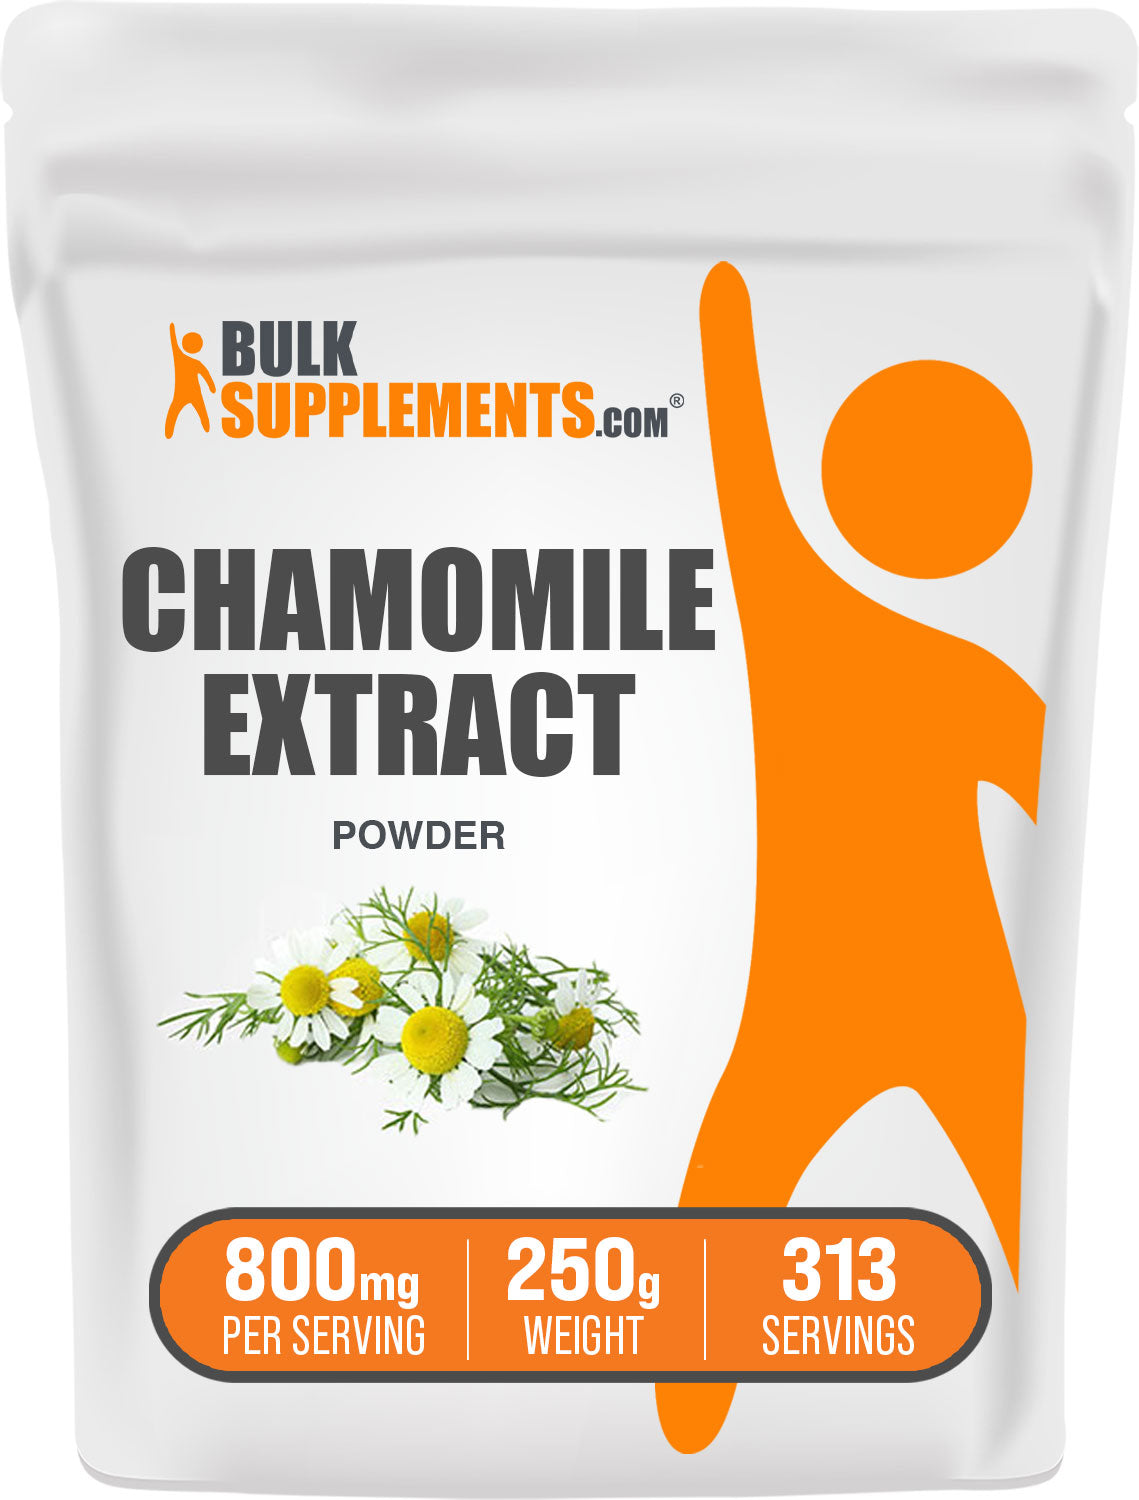 250g of chamomile extract